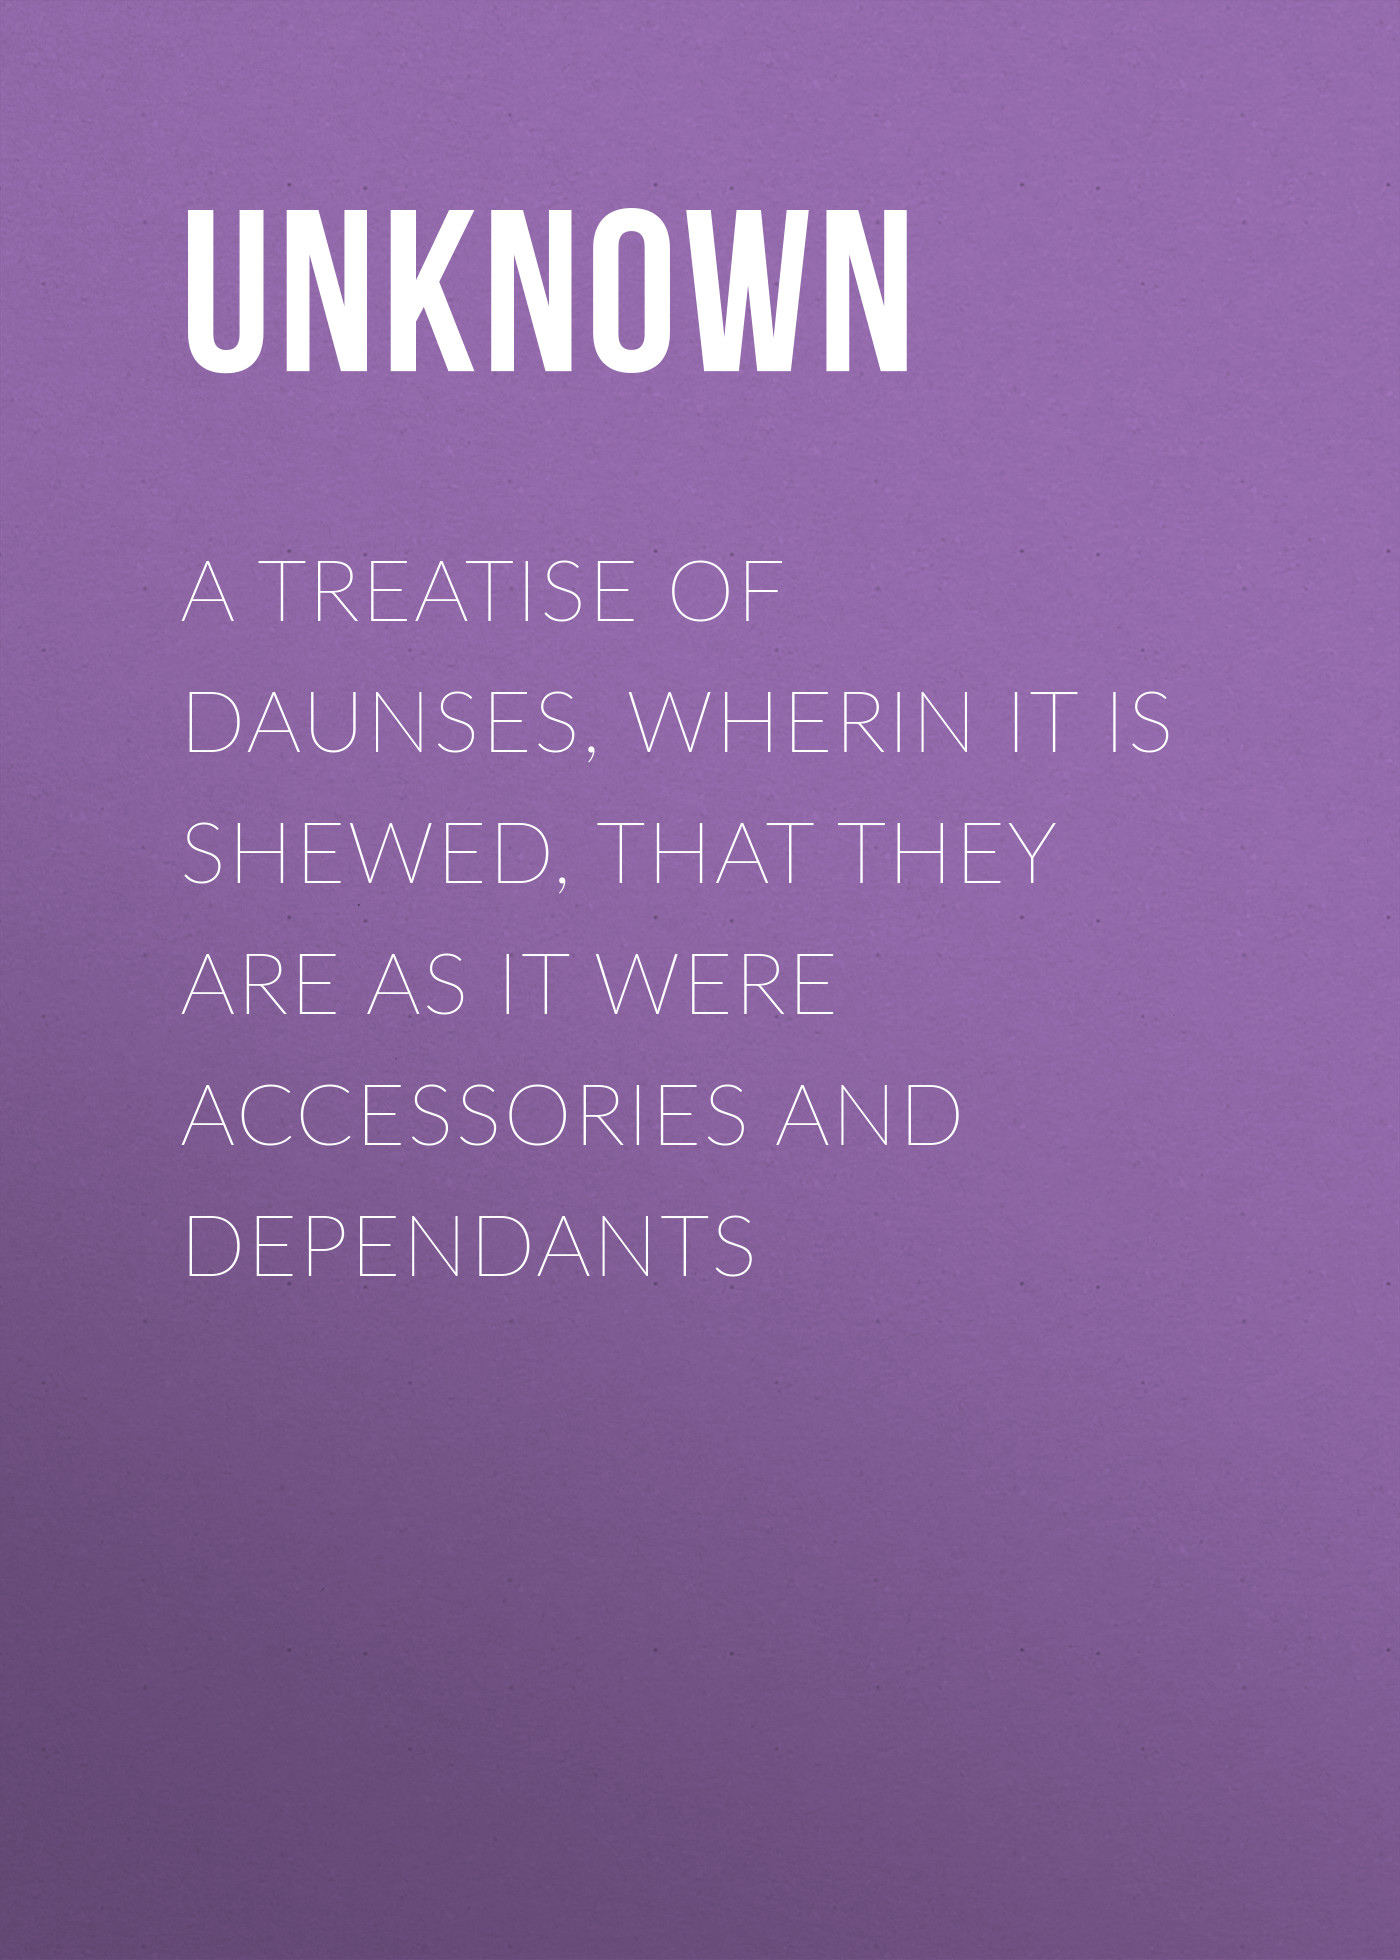 A Treatise of Daunses, Wherin It is Shewed, That They Are as It Were Accessories and Dependants